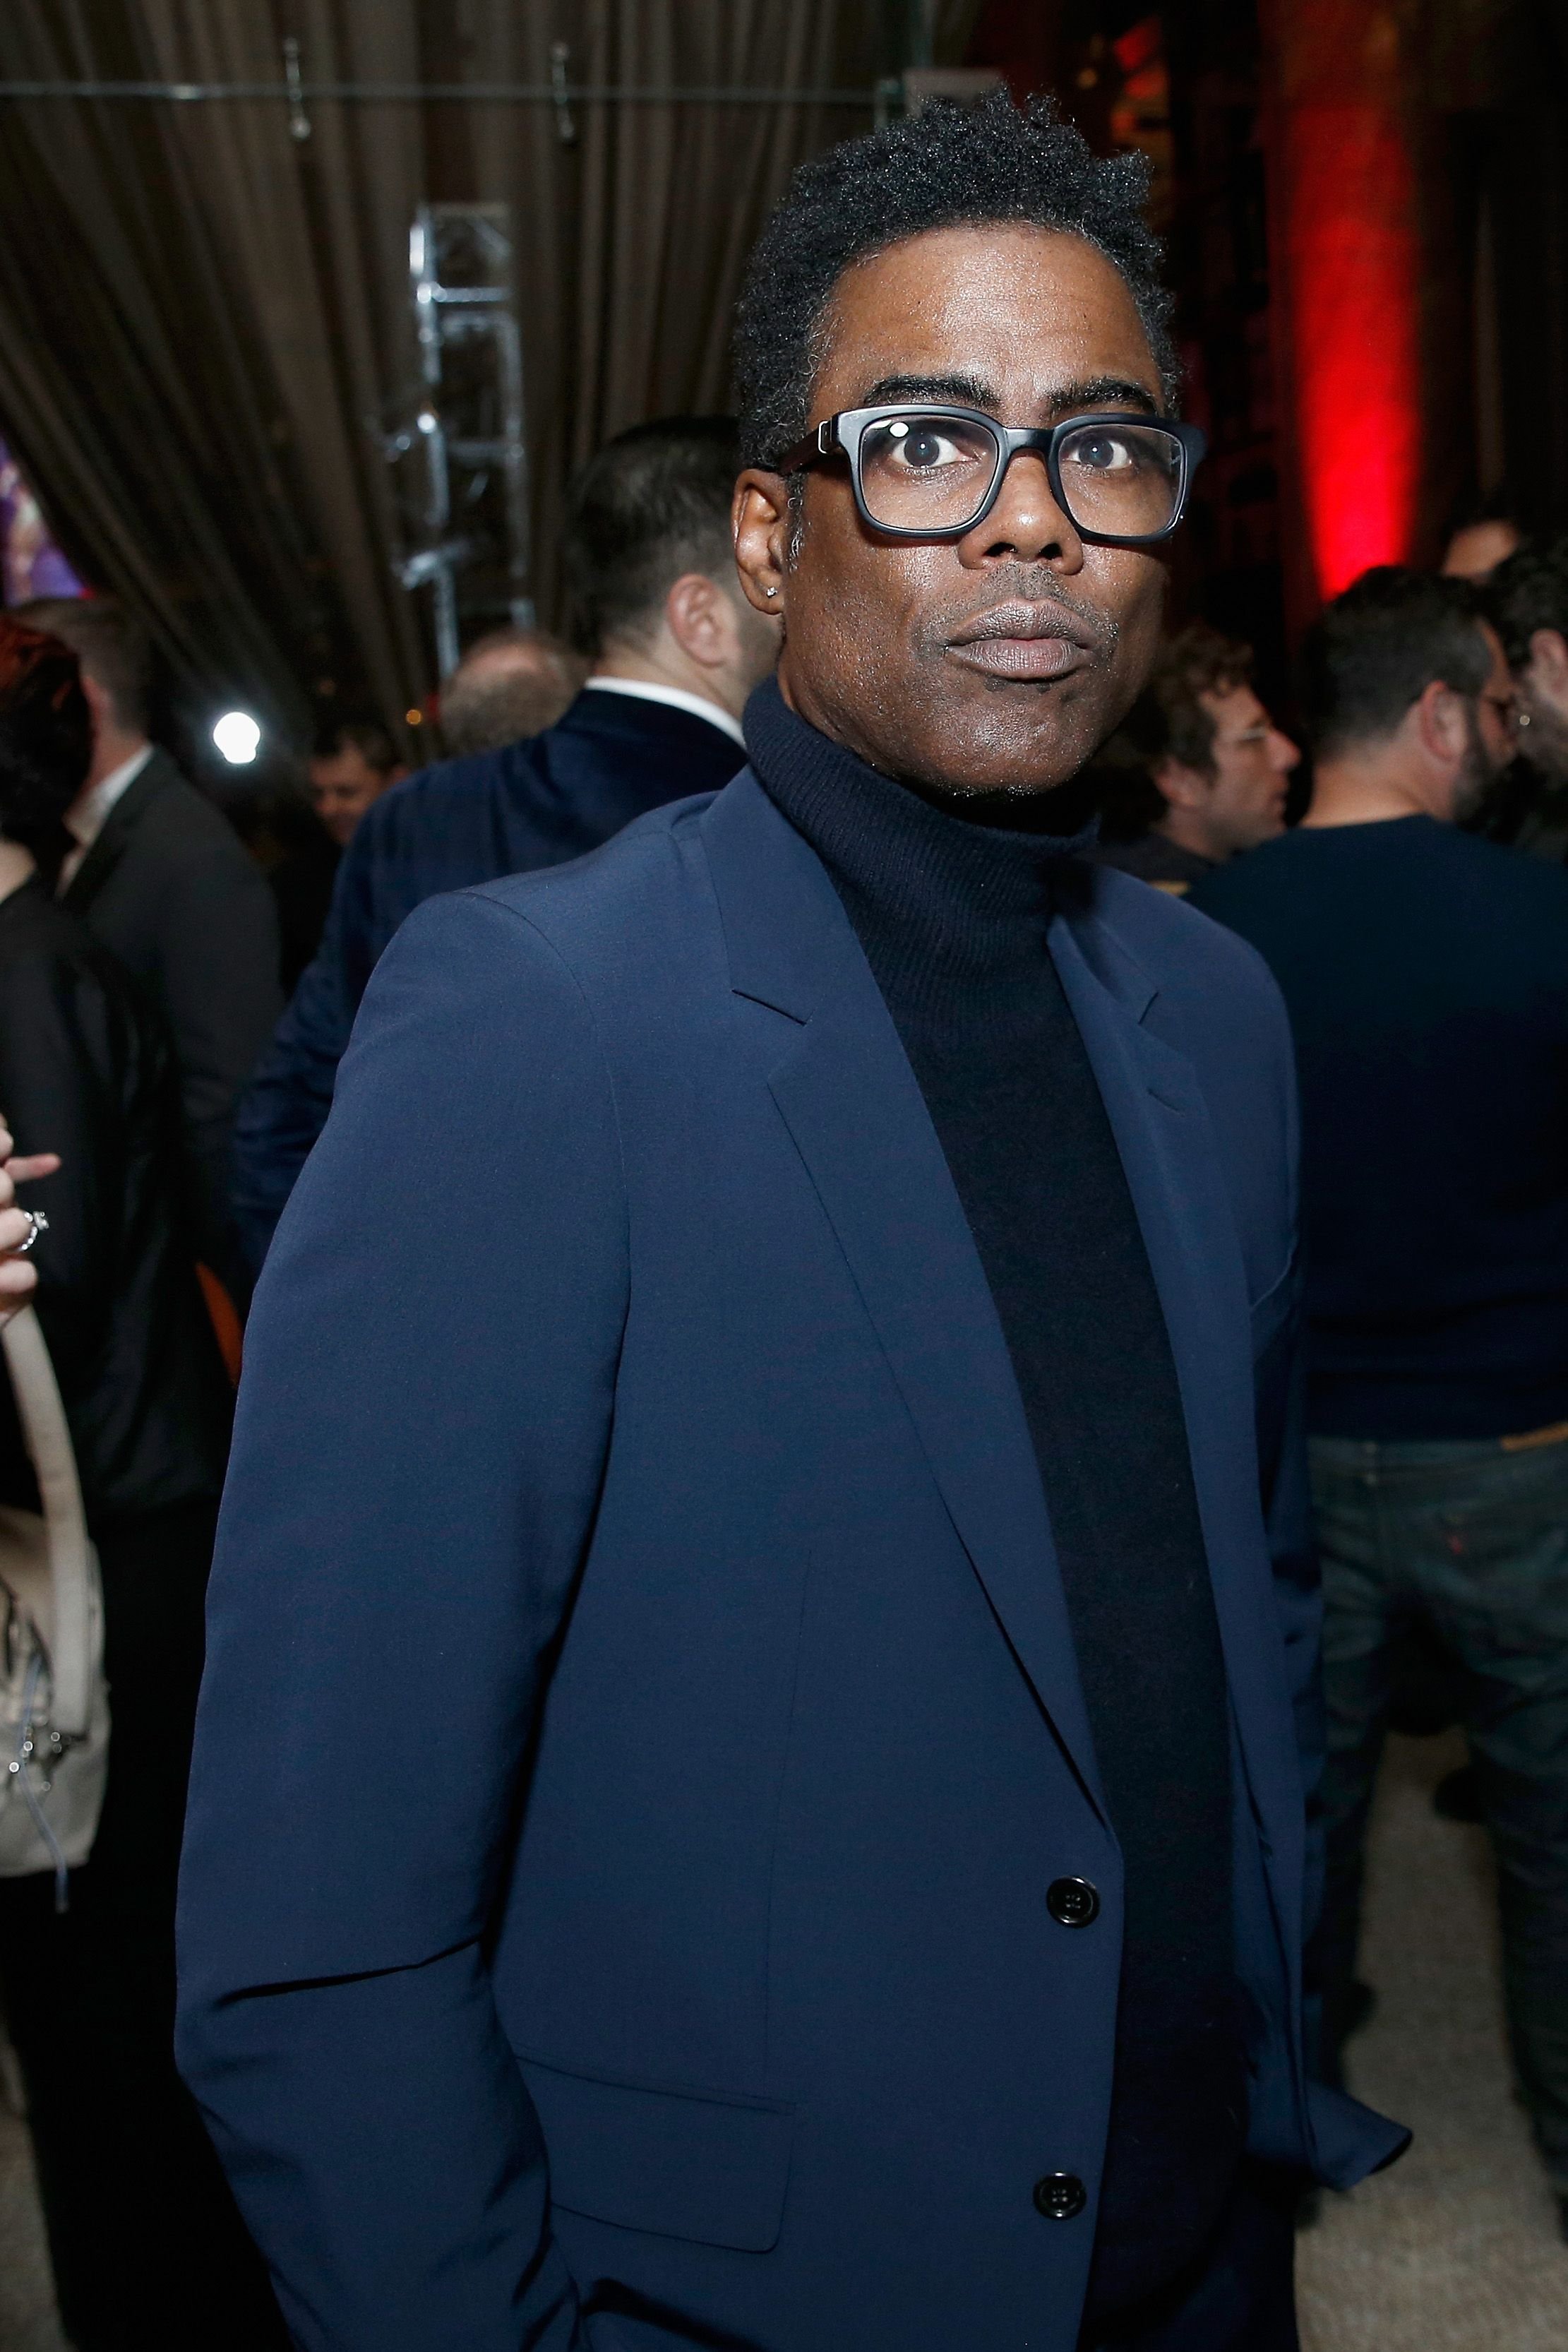 Chris Rock during the TIME Person Of The Year Celebration at Capitale on December 12, 2018 in New York City. | Source: Getty Images